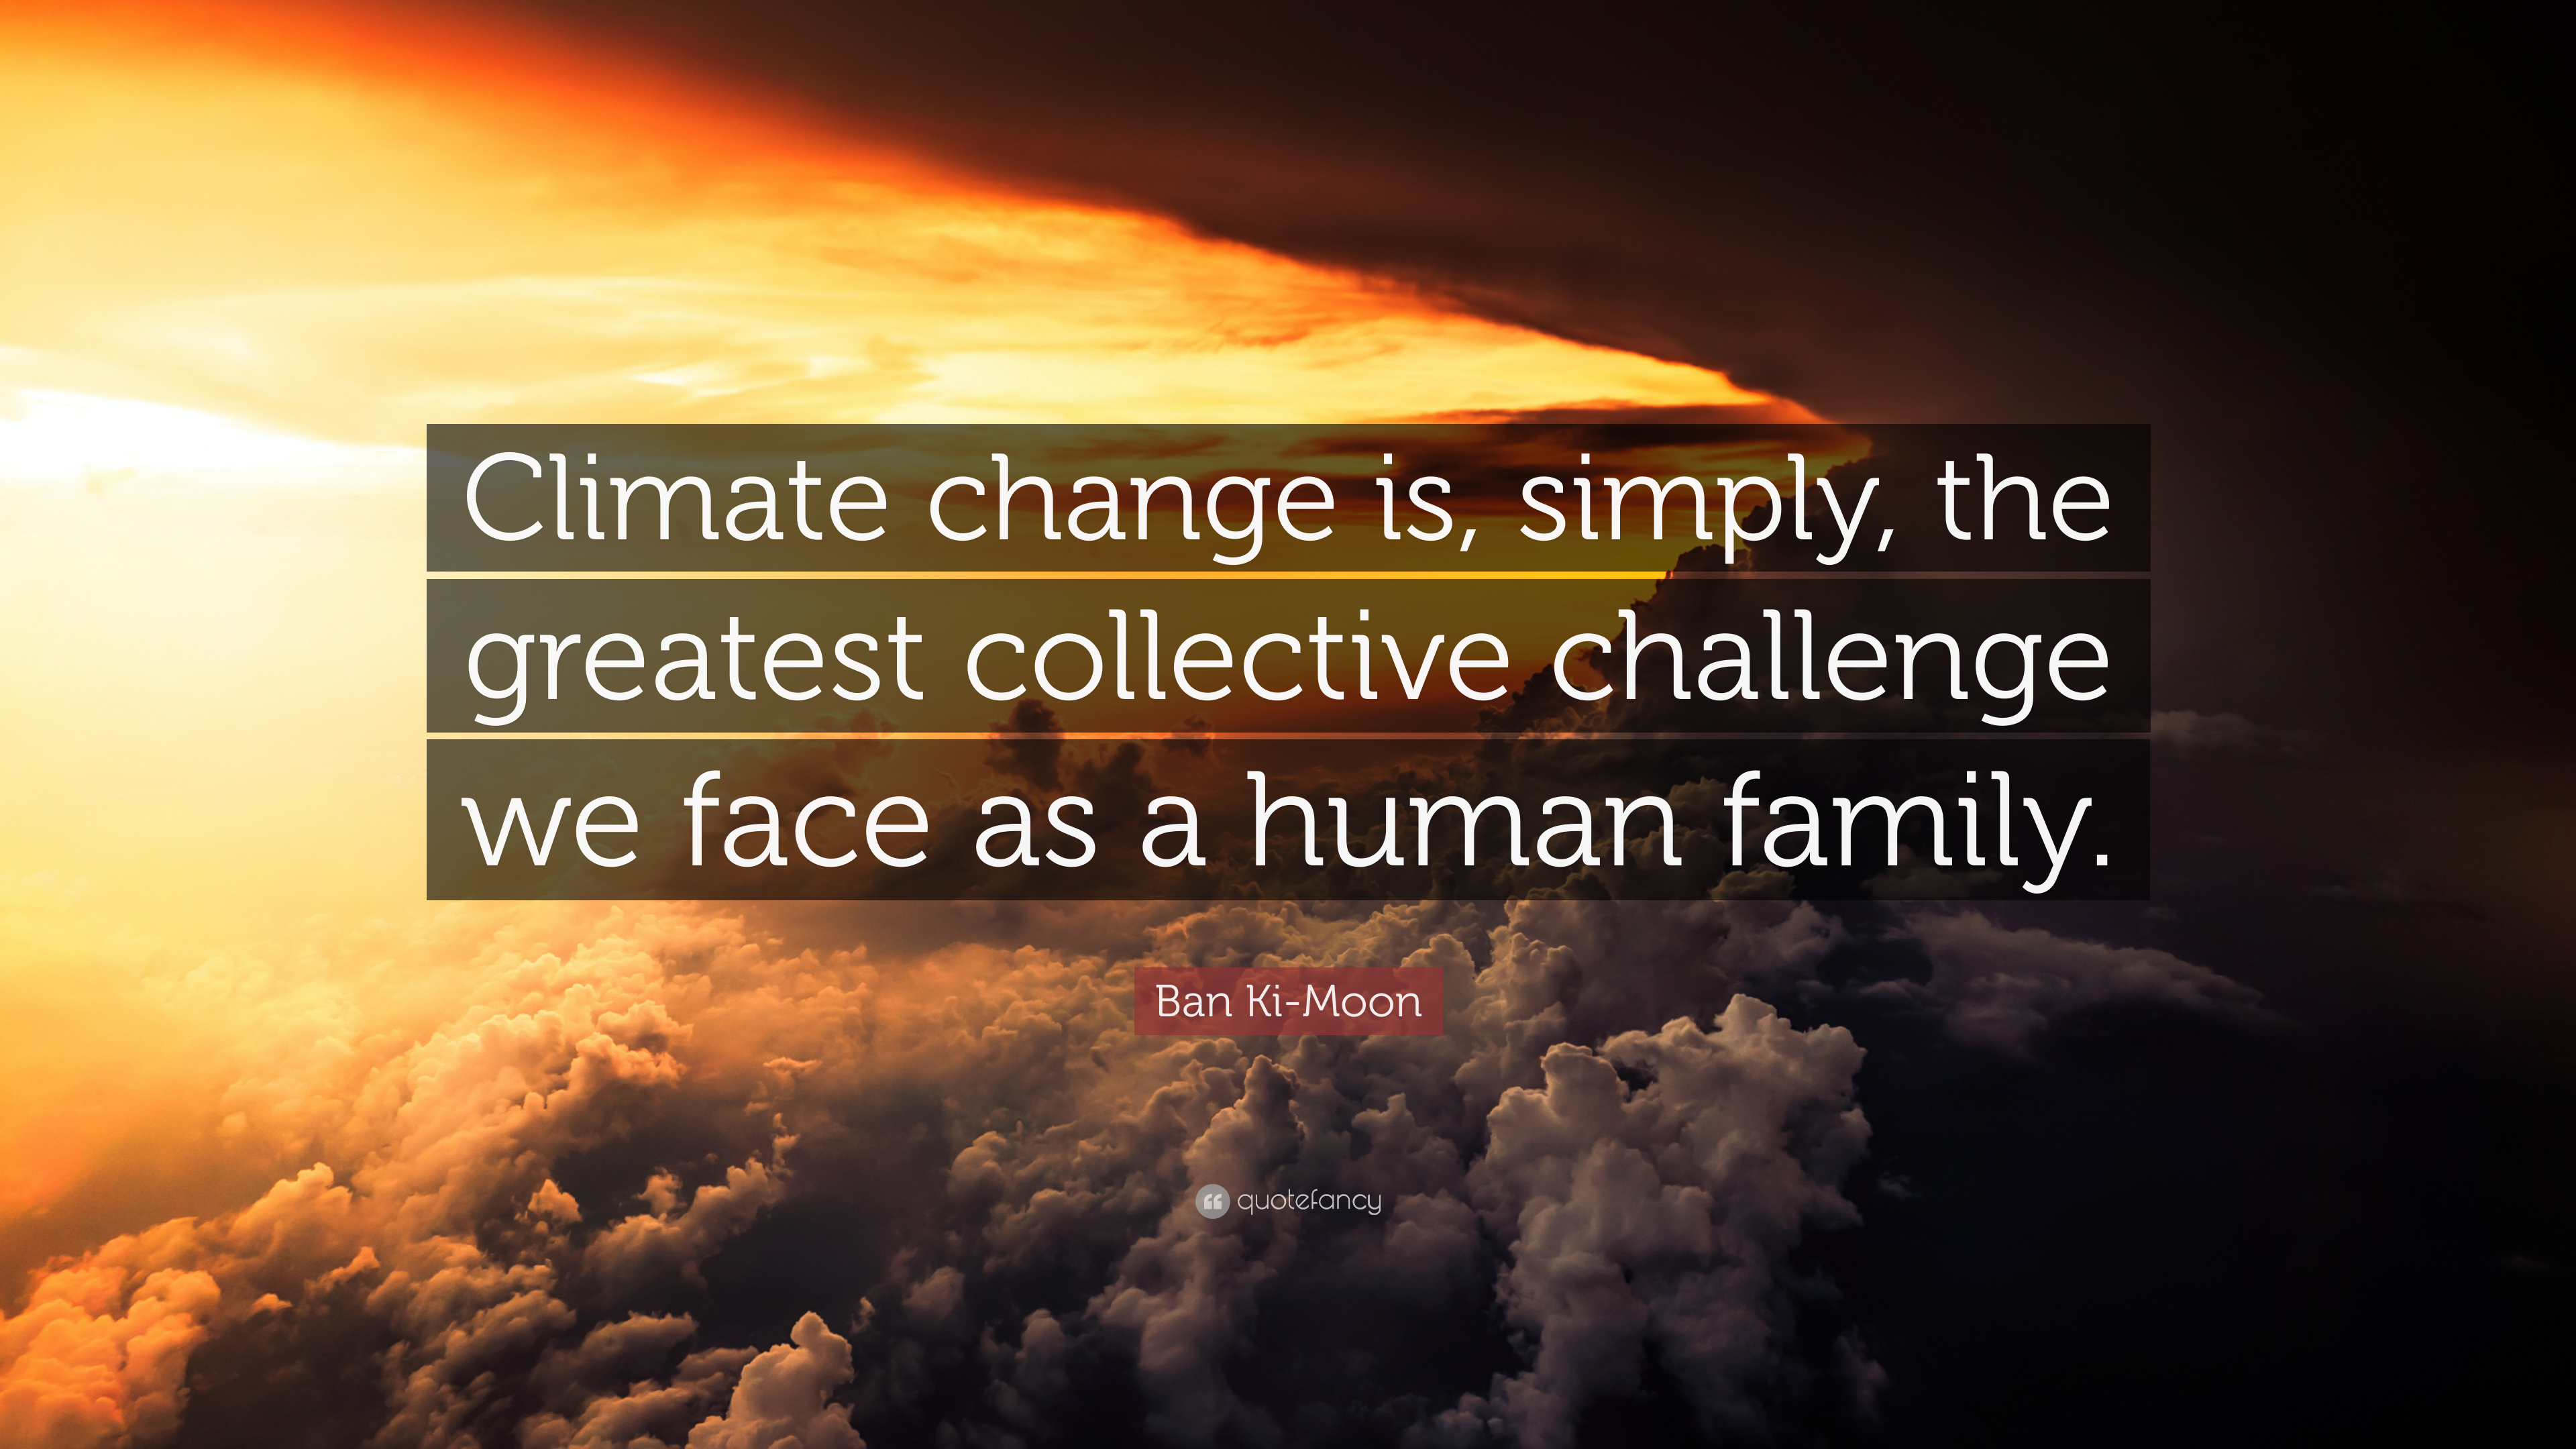 Ban Ki Moon Quote: “Climate Change Is, Simply, The Greatest